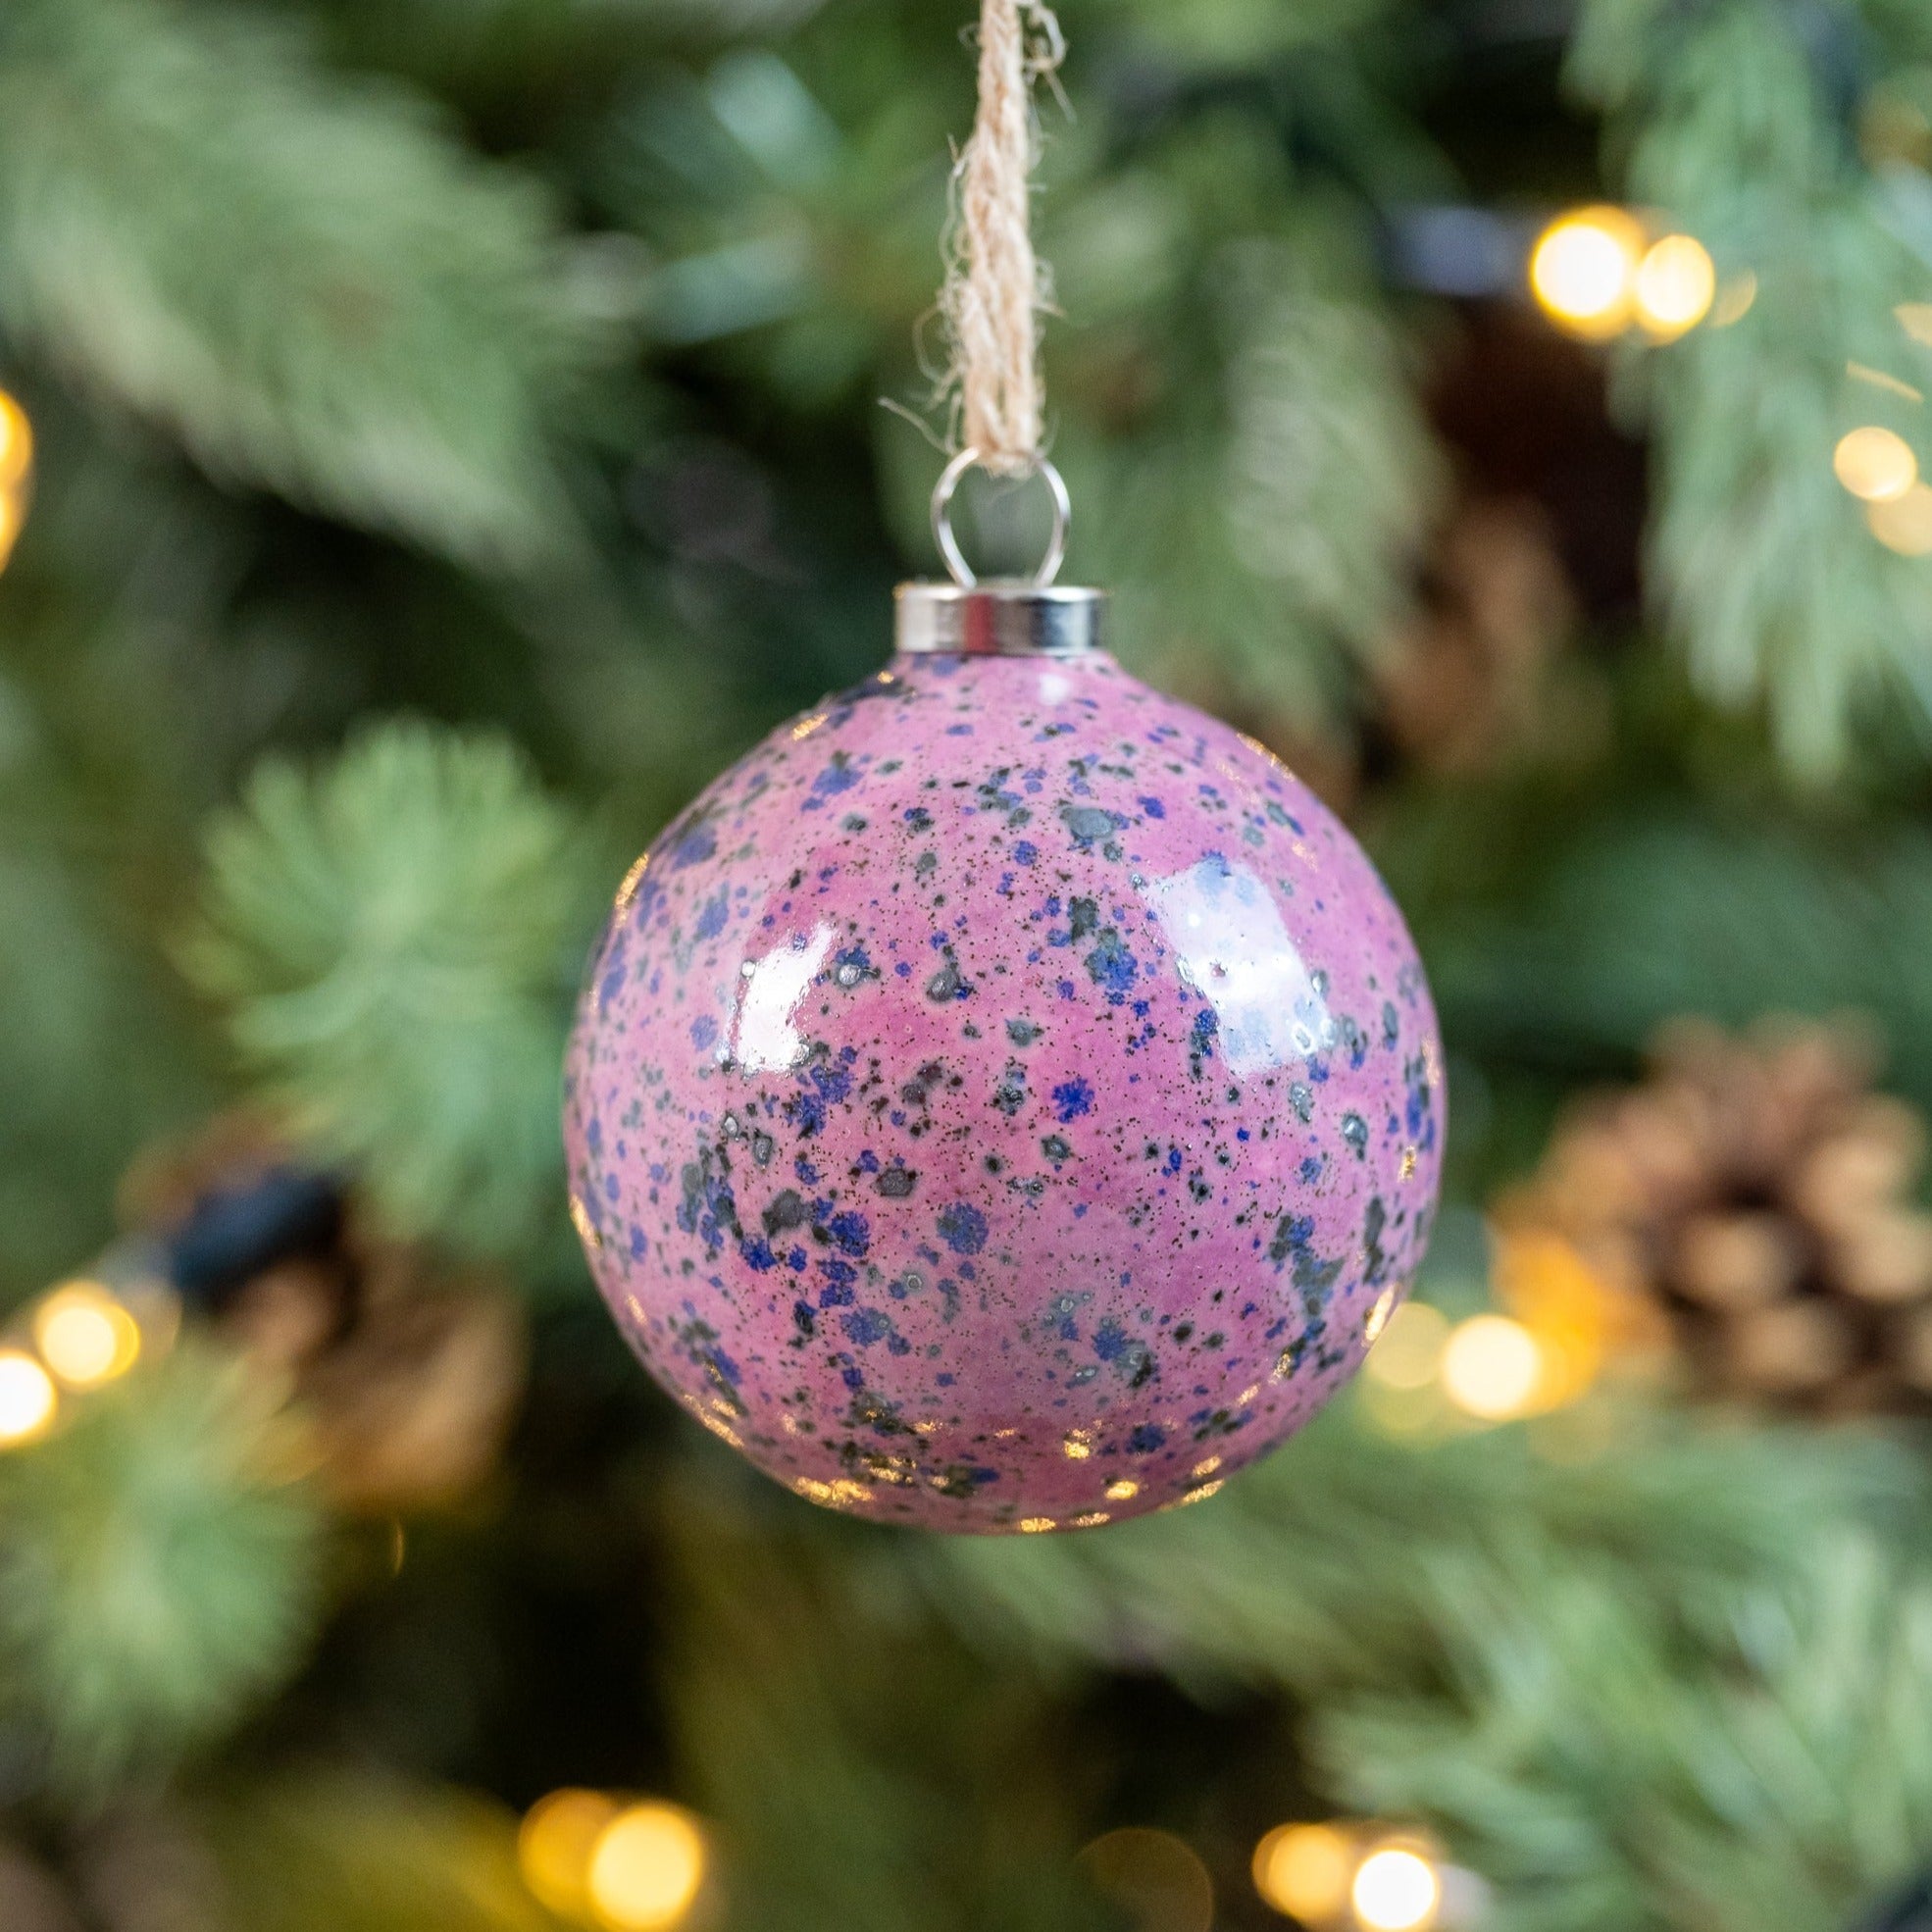 Pink & Grey Hand-Painted Ceramic Bauble | Round Shape